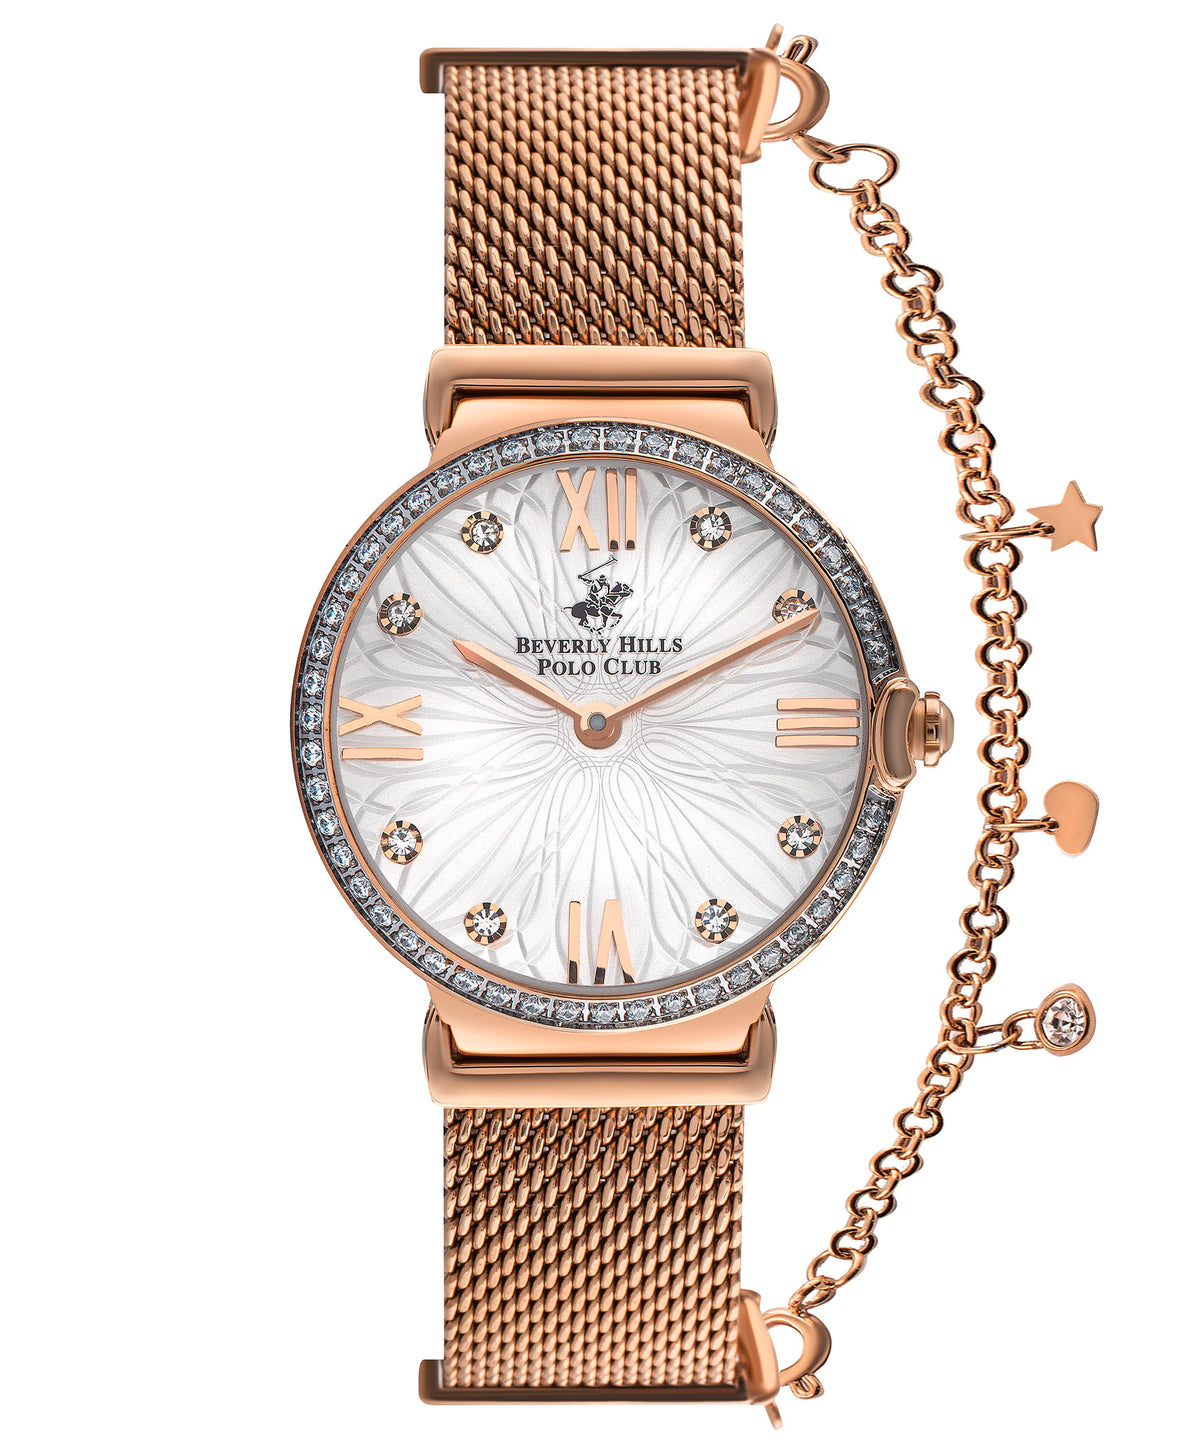 Beverly Hills Polo Club  Women's Analog Watch, Silver Dial & Rose Gold Stainless Steel Strap, BP3363C.430